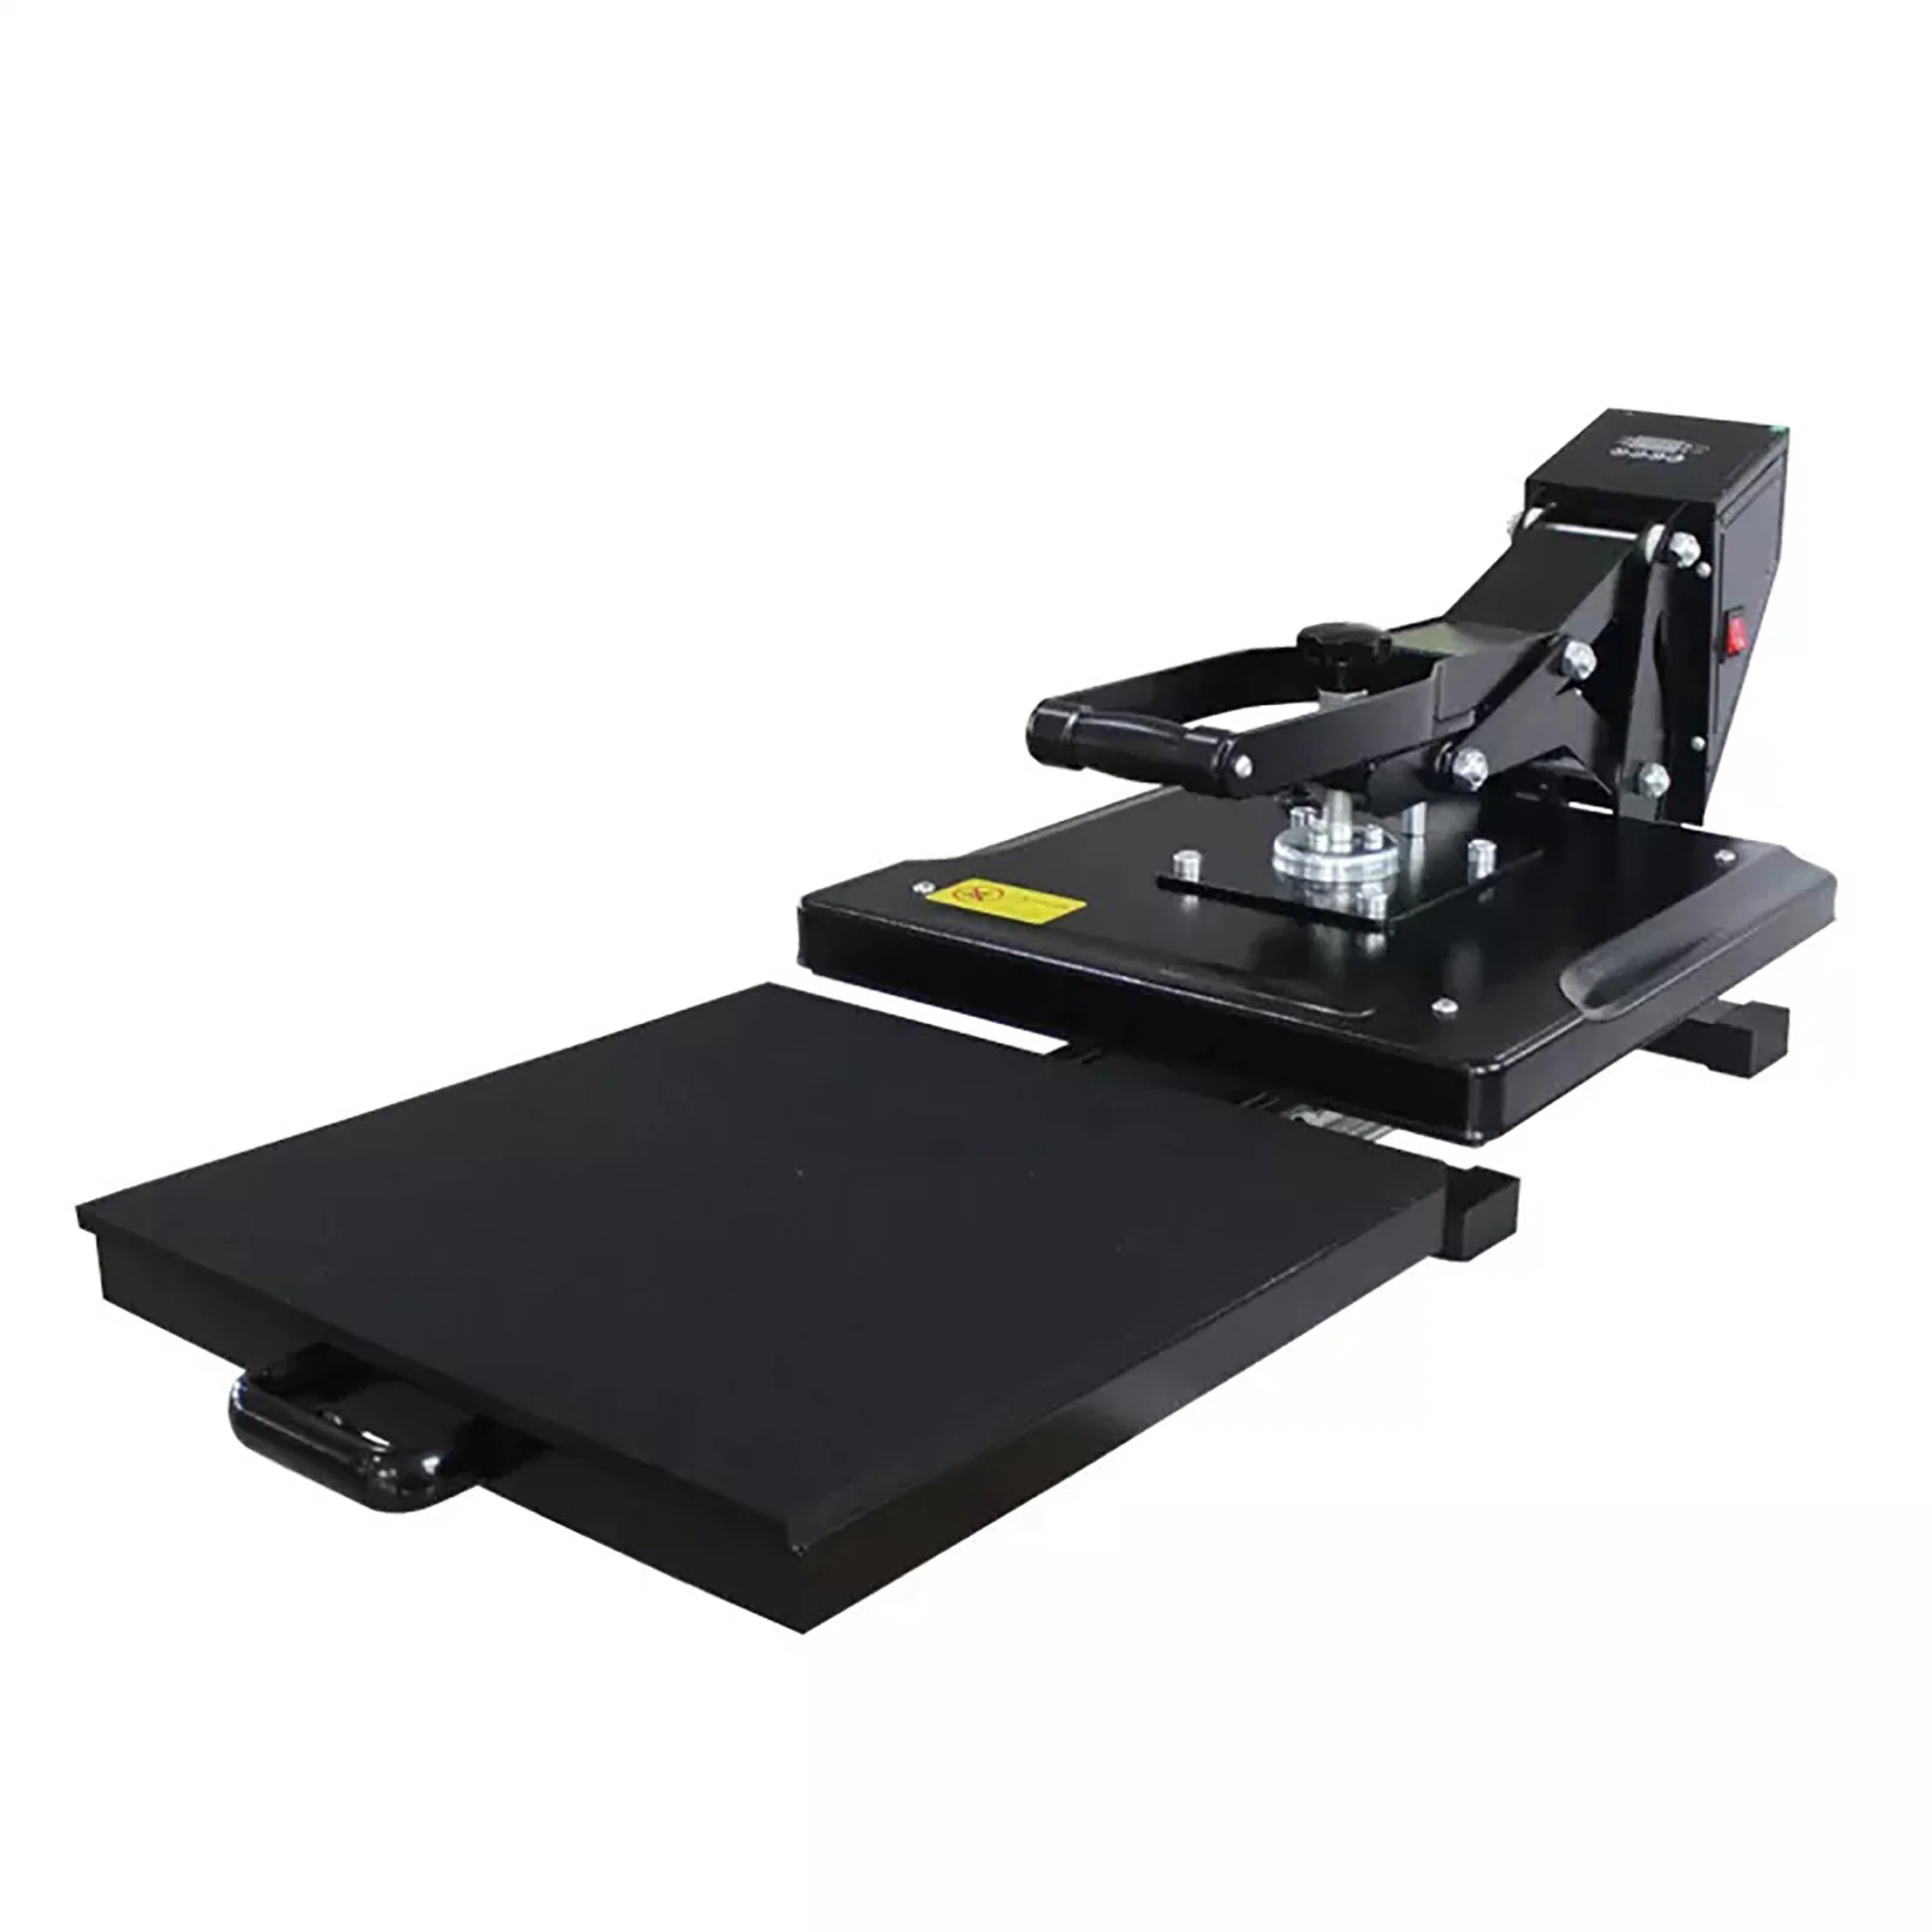 38*38cm 15"*15"Inch High Quality Manual Operated T-Shirt Cloth Textile Mouse Pad Stable Running Heat Press Transfer Printing Machine with Fully Slide-out Bottom